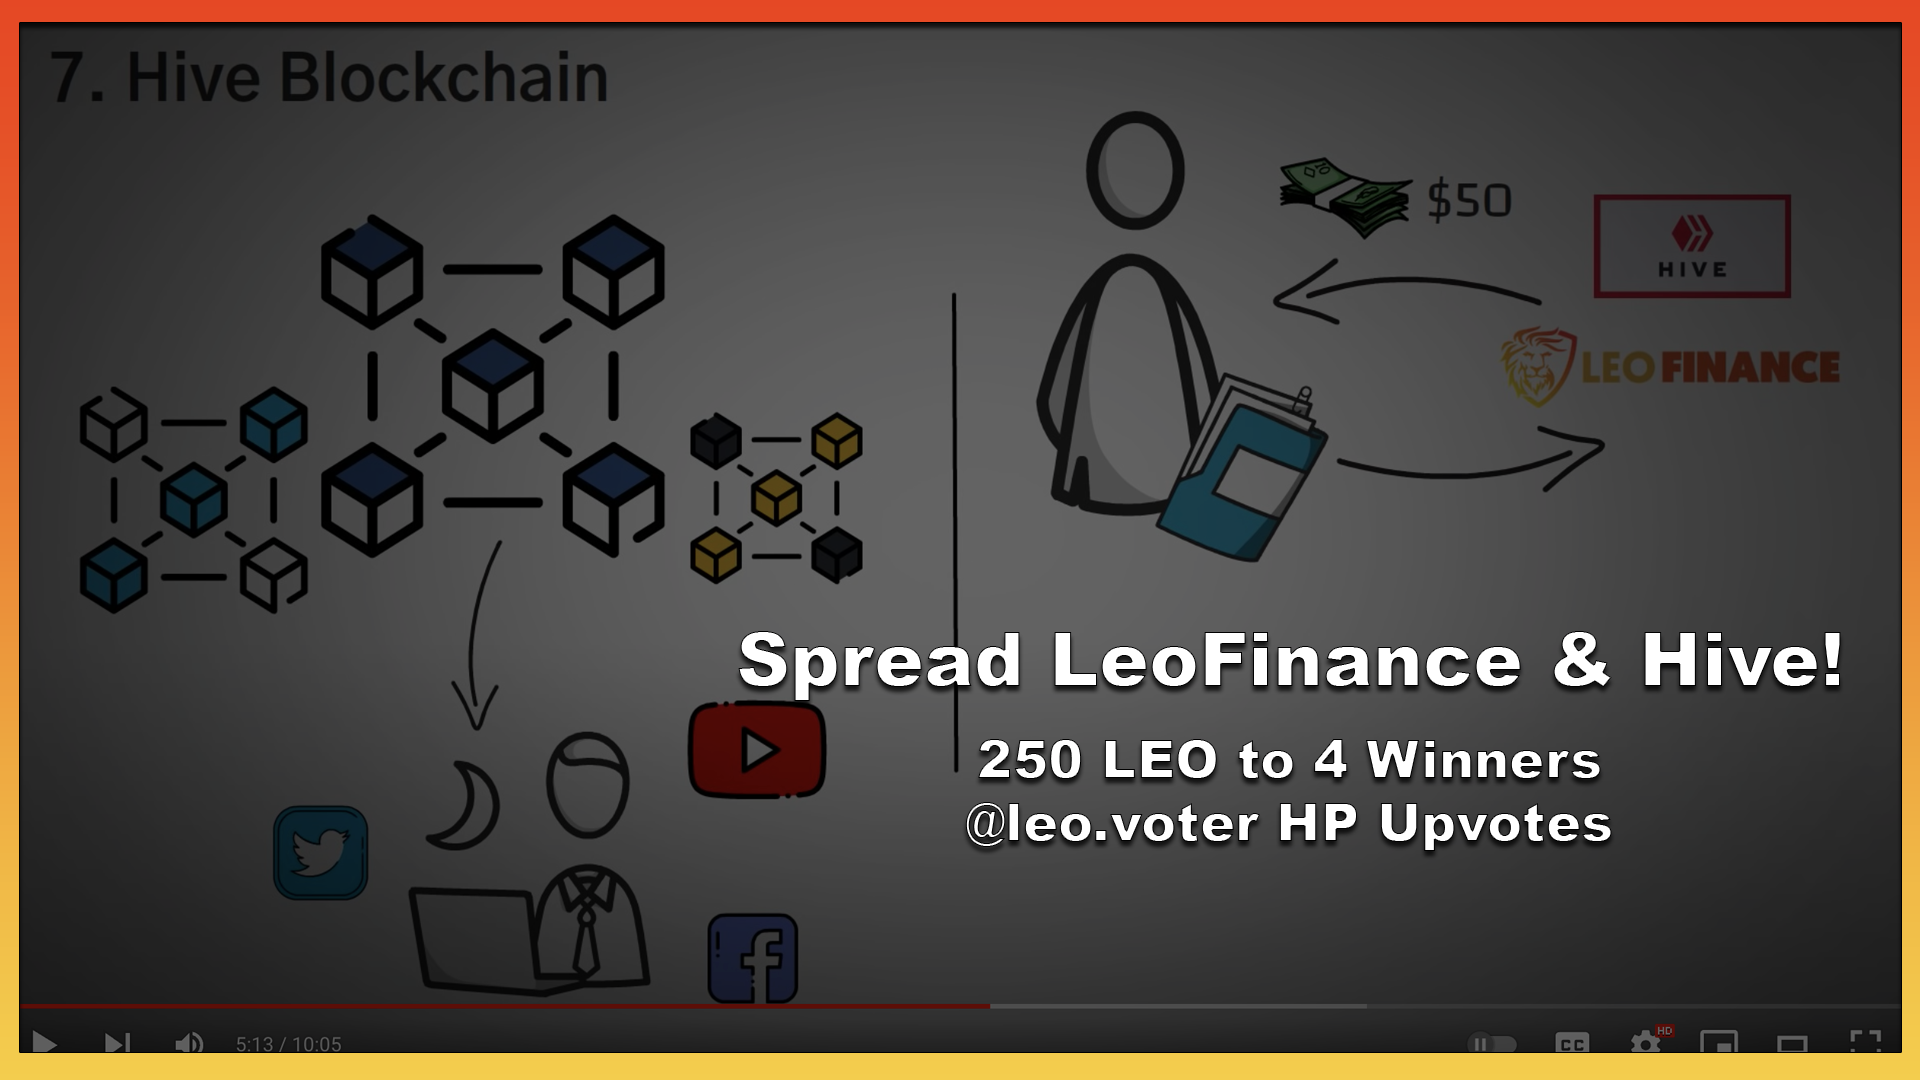 @leofinance/call-to-action-or-hive-and-leofinance-mentioned-as-one-of-the-top-ways-to-earn-crypto